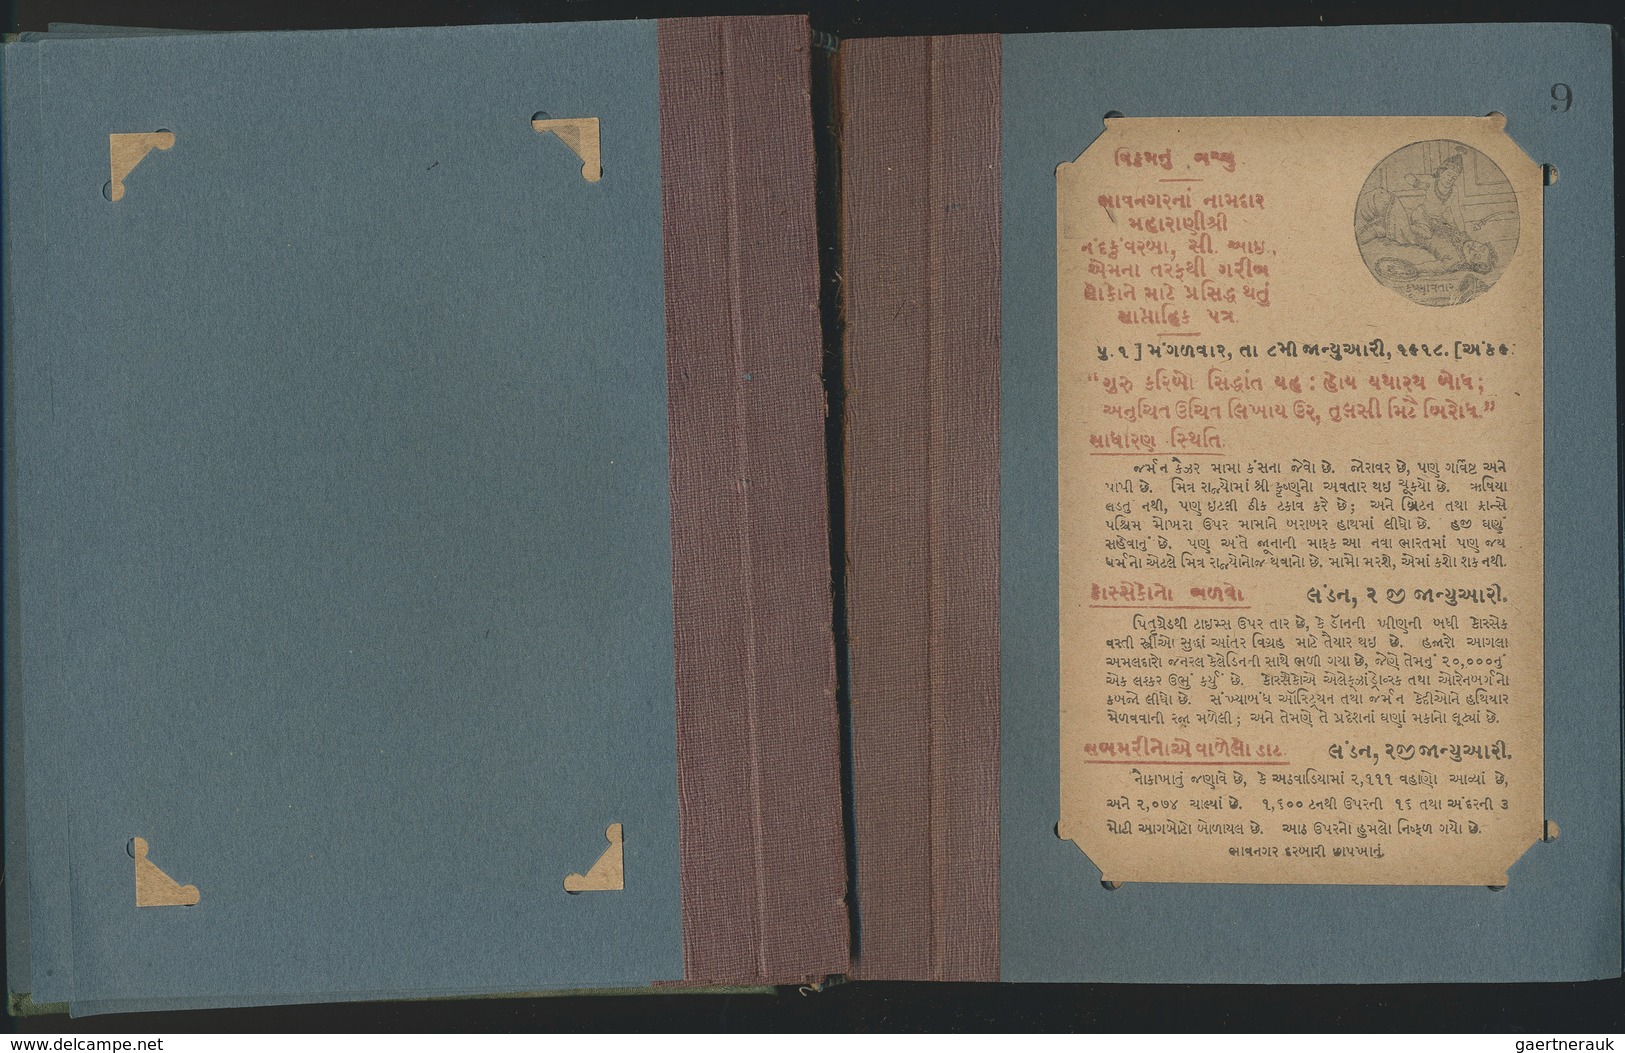 GA Indien: 1917-18, 'Album of Vikram-Nu-Bachu' containing all the 50 KGV. 1/4a PS cards with title card